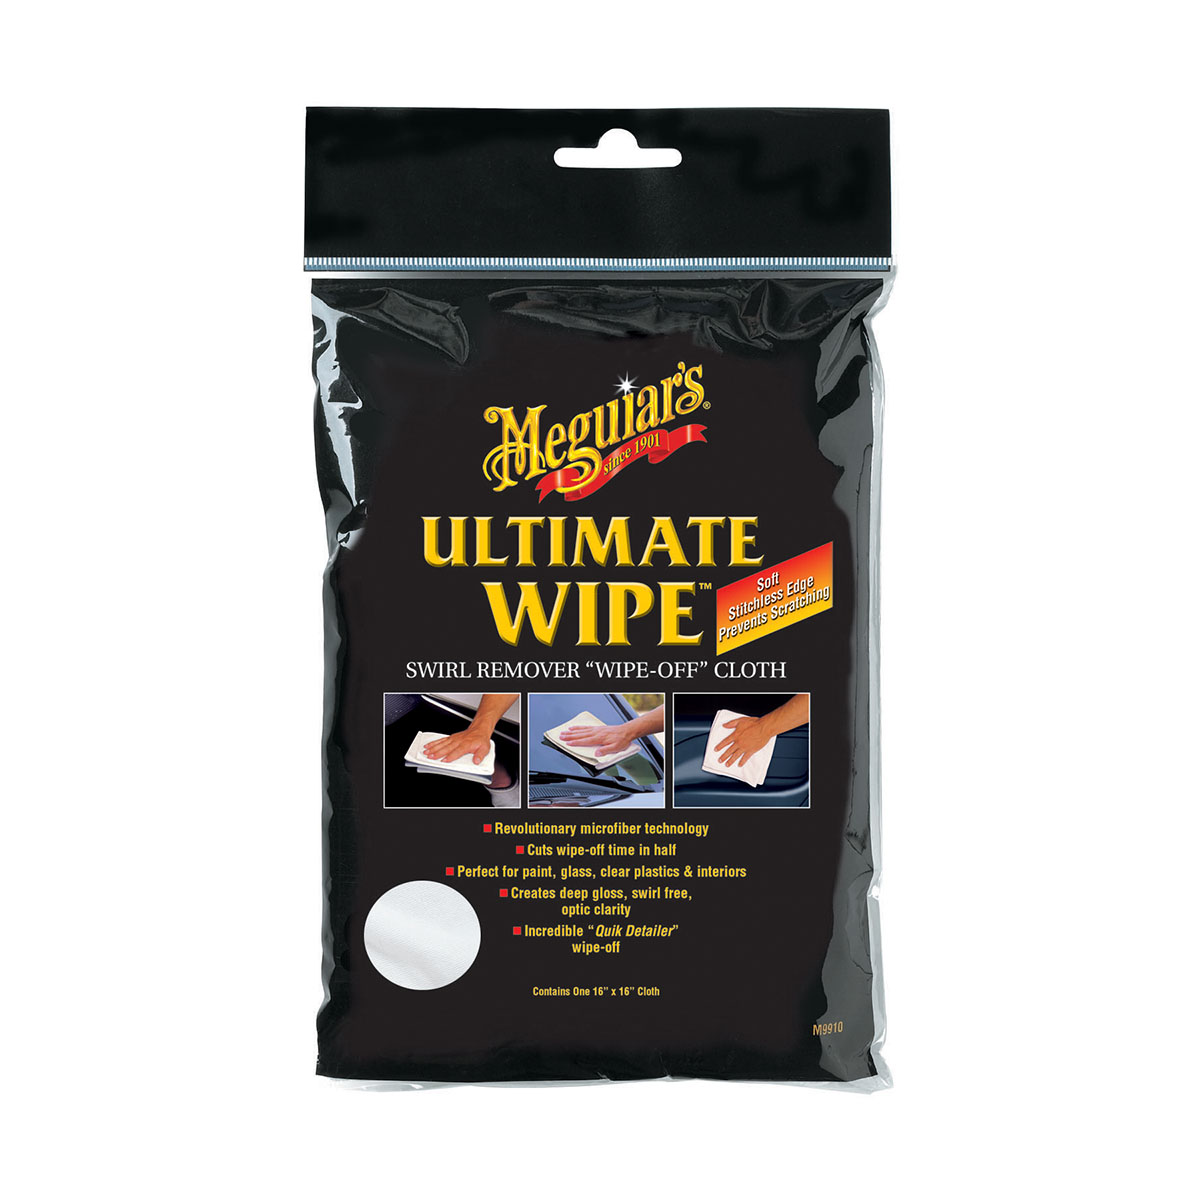 MEGUIARS Ultimate Wipe - Mikrofaser Poliertuch